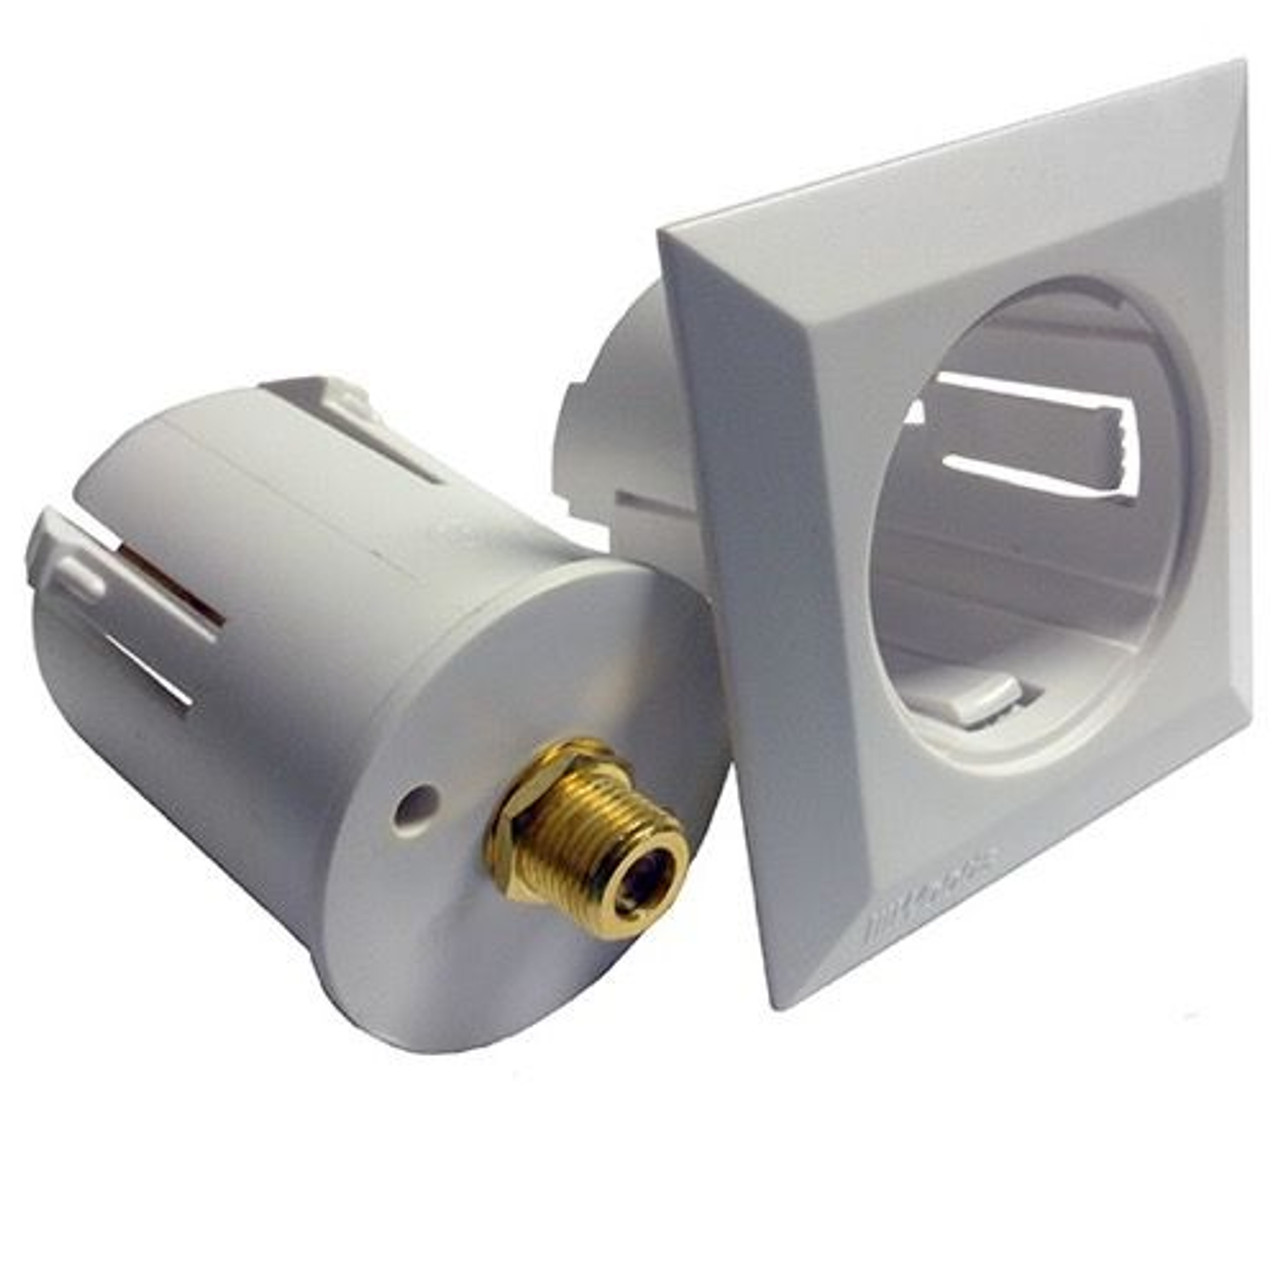 F-Jack Wall Plate Insert White Outlet Jack Plug Insert Adapter Custom Coax Cable Compact Round A/V Digital Signal 75 Ohm Coaxial Cable System, Part # Woods Gizzmo 5807